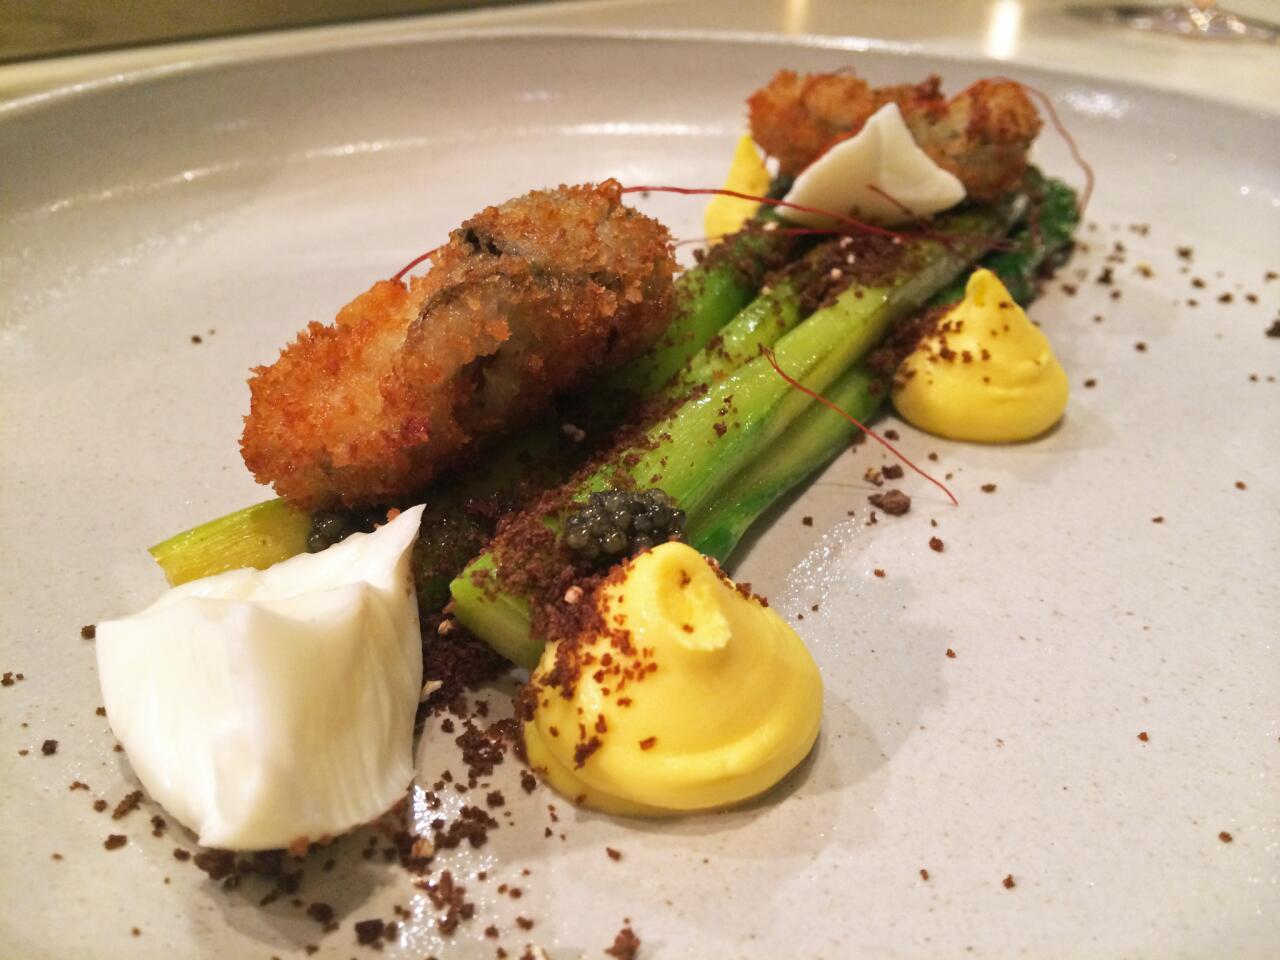 Asparagus with fried oysters, pickled egg whites, deviled egg puree, caviar, black bread crumbs and chile threads.